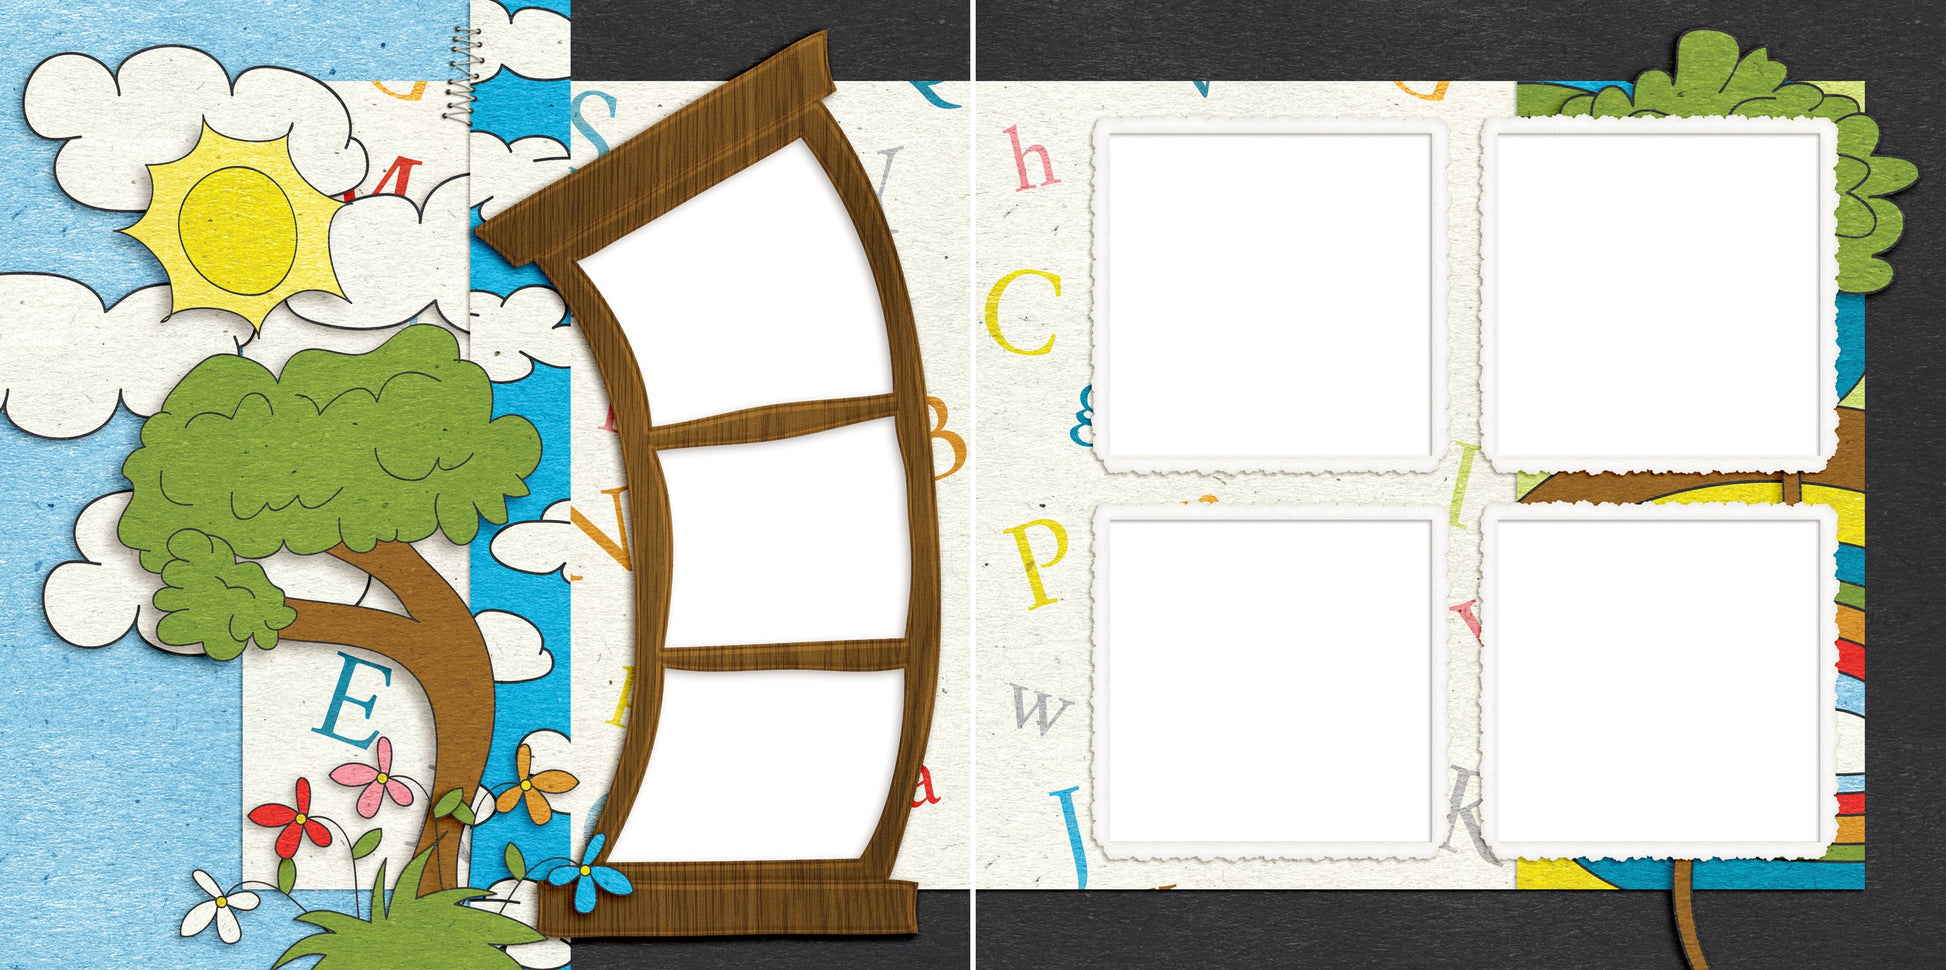 ABC's - Digital Scrapbook Pages - INSTANT DOWNLOAD - EZscrapbooks Scrapbook Layouts learning, reading, school, story, storytime